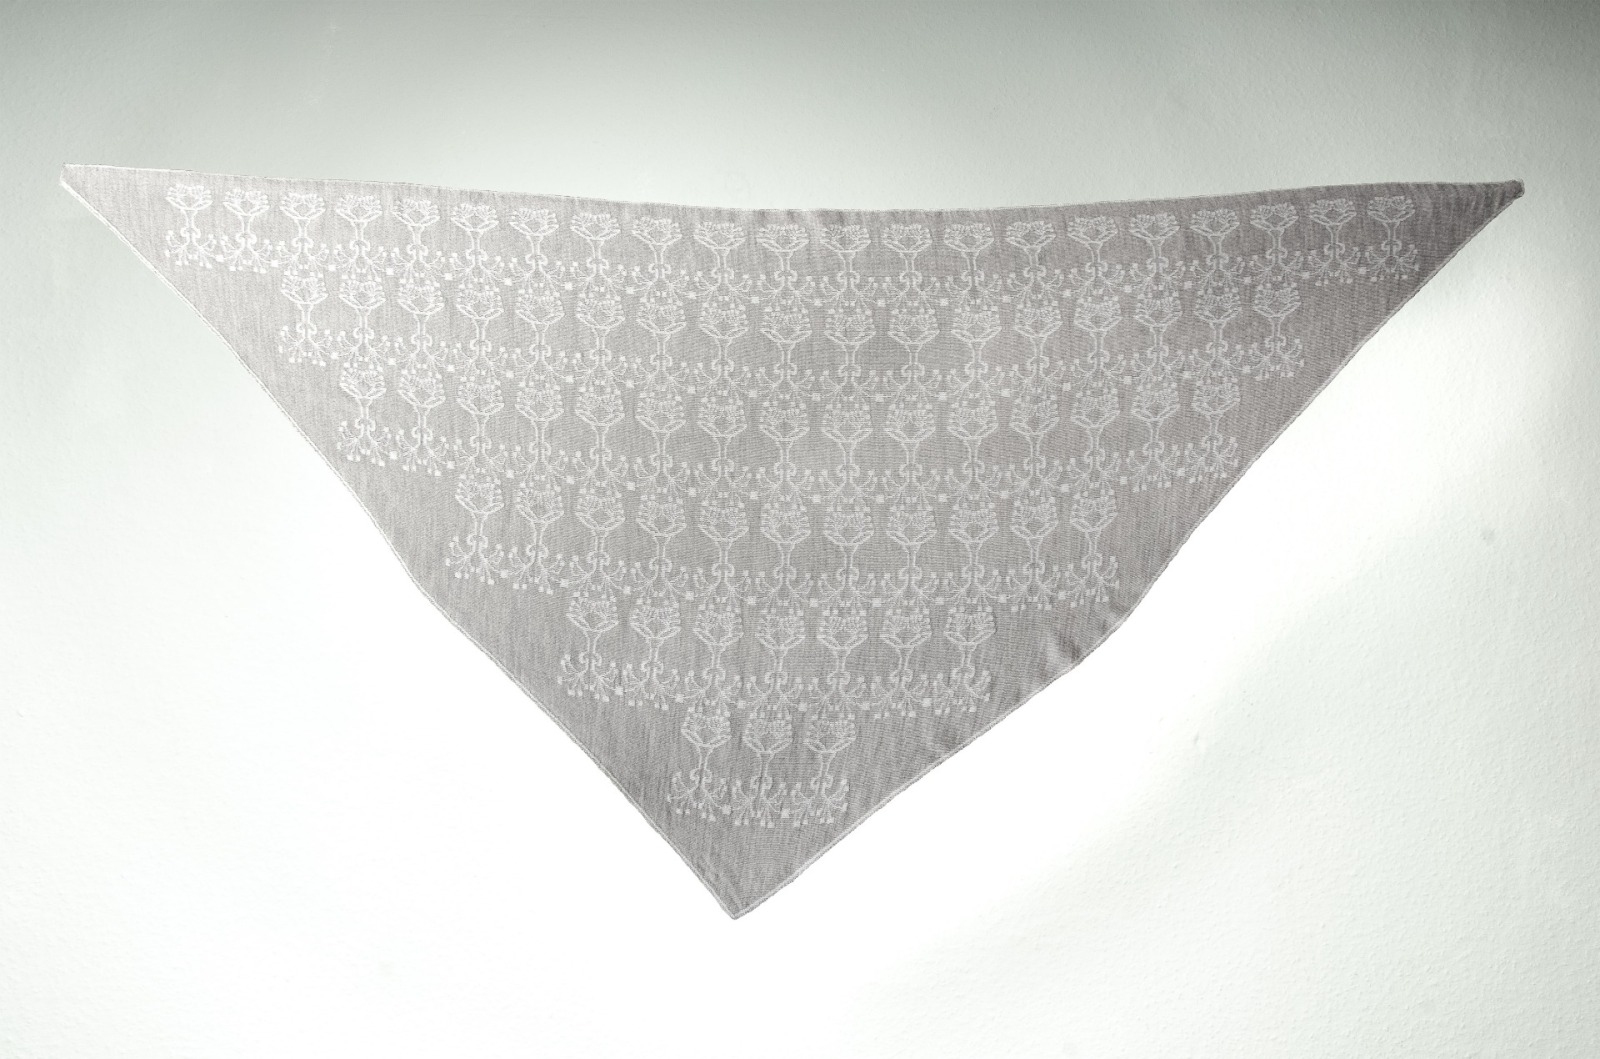 festive stole, triangular shawl jewelry in white and silver 4